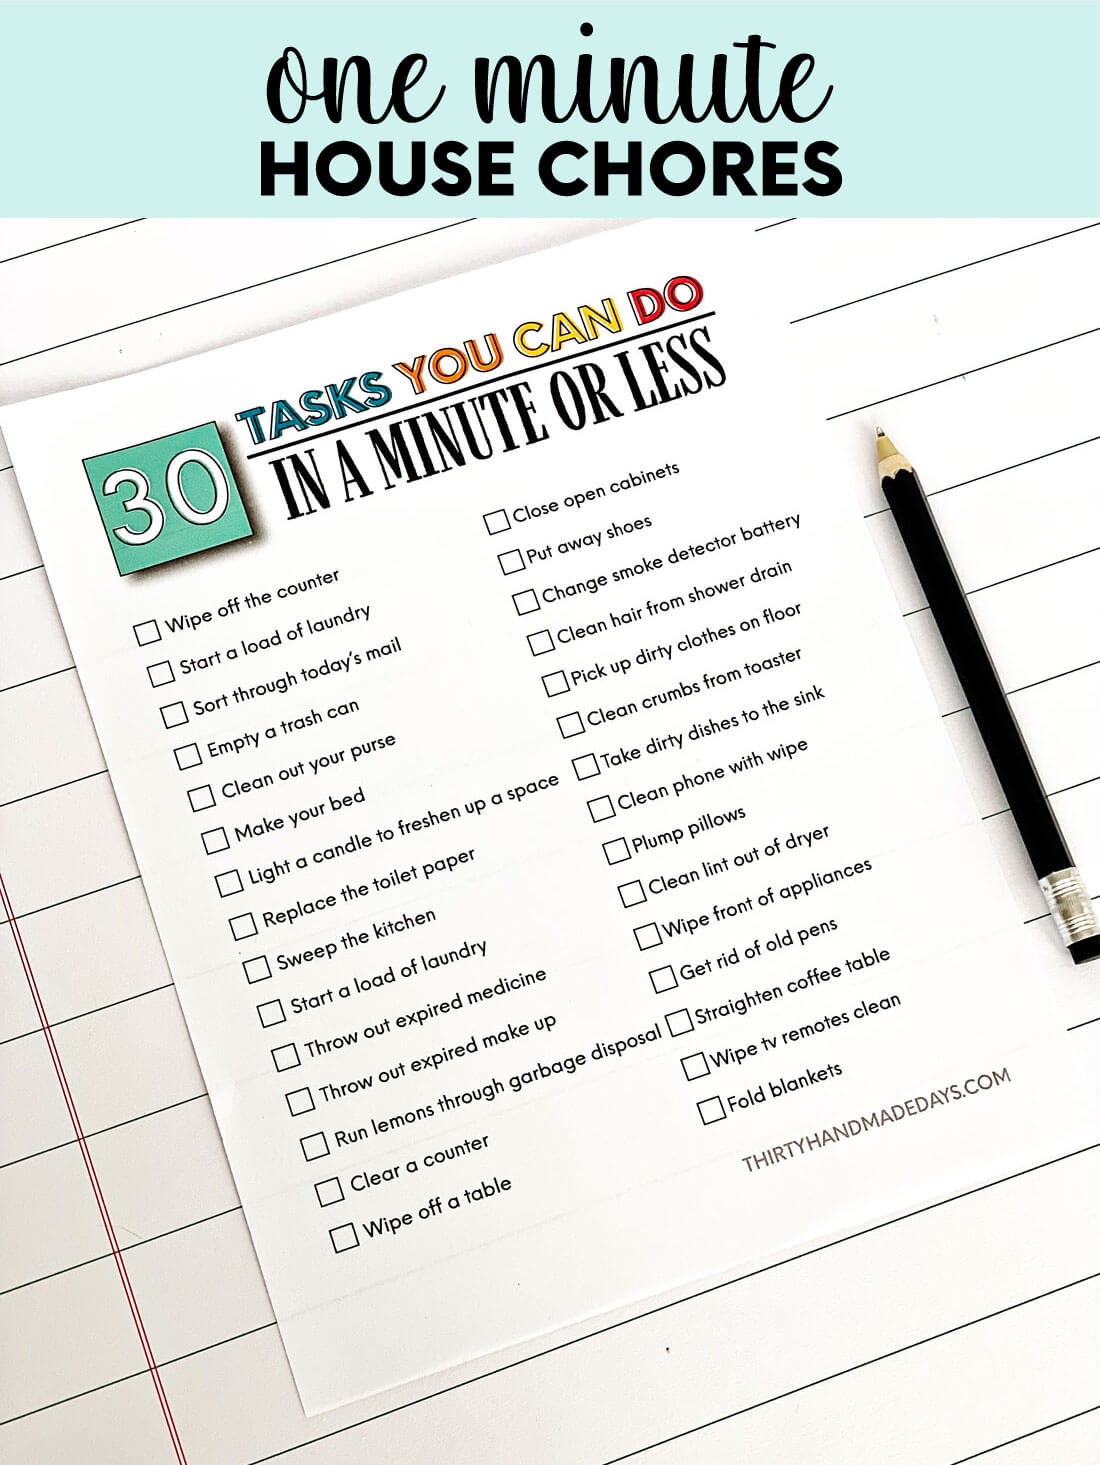 House Chores printable to download